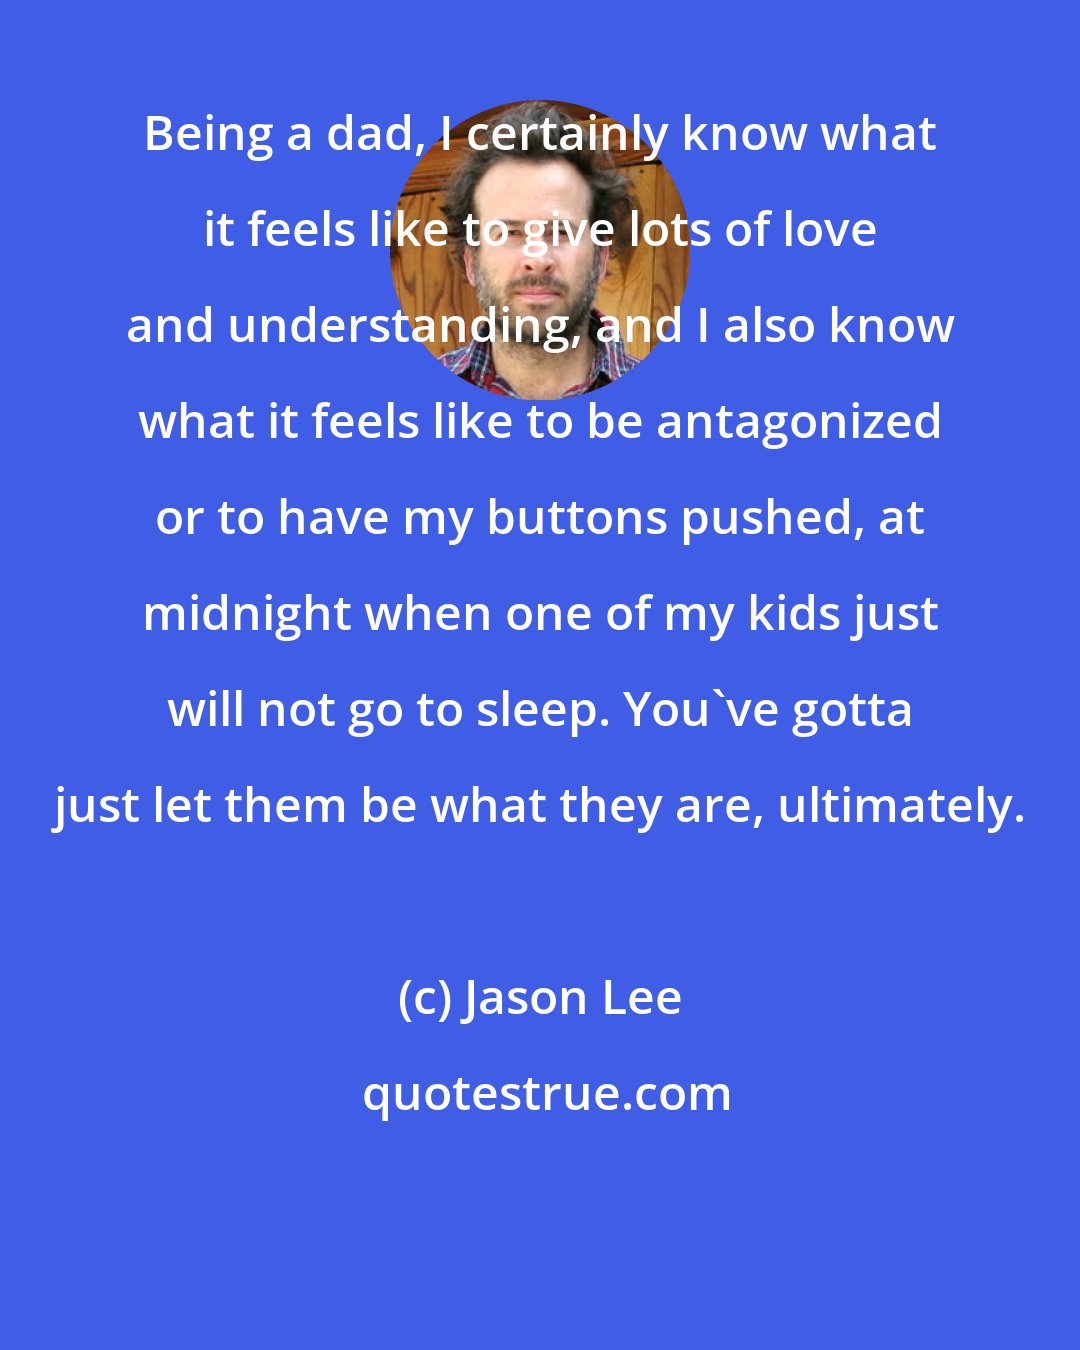 Jason Lee: Being a dad, I certainly know what it feels like to give lots of love and understanding, and I also know what it feels like to be antagonized or to have my buttons pushed, at midnight when one of my kids just will not go to sleep. You've gotta just let them be what they are, ultimately.